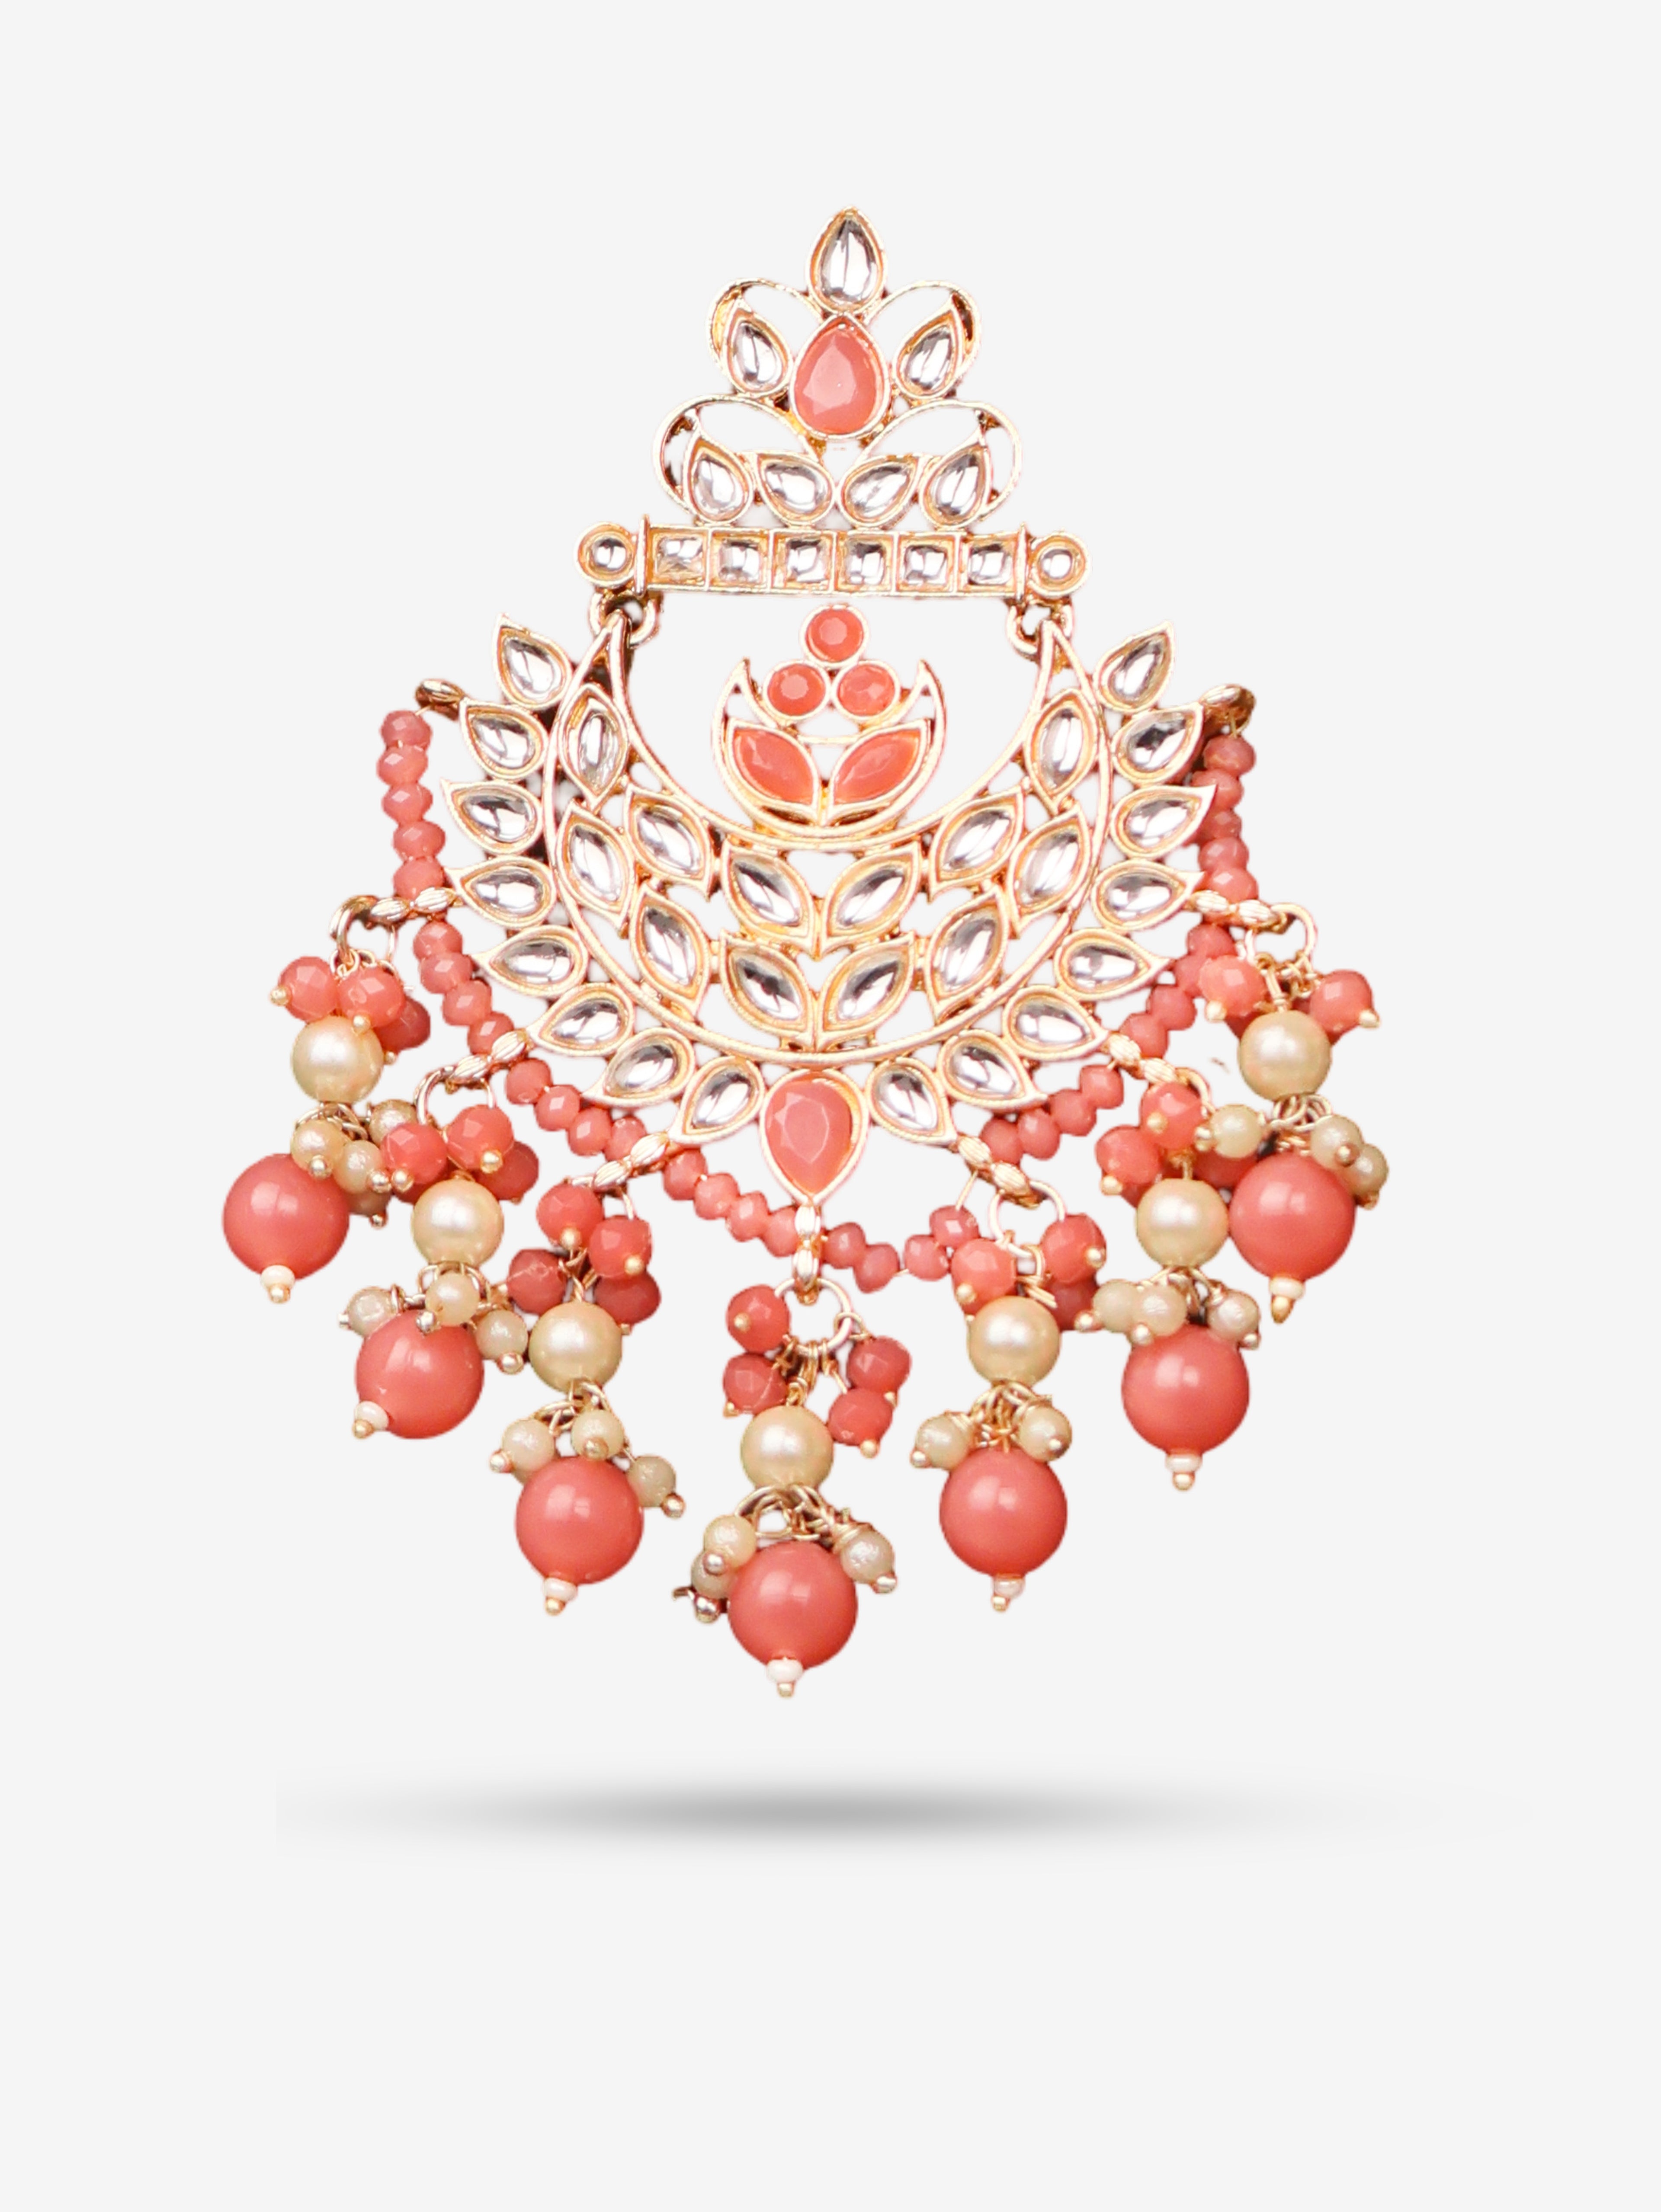 Kundan &amp; Pearl Drop Earrings with Textured Detailing for Women by Shreekama Peach Fashion Jewelry for Party Festival Wedding Occasion in Noida